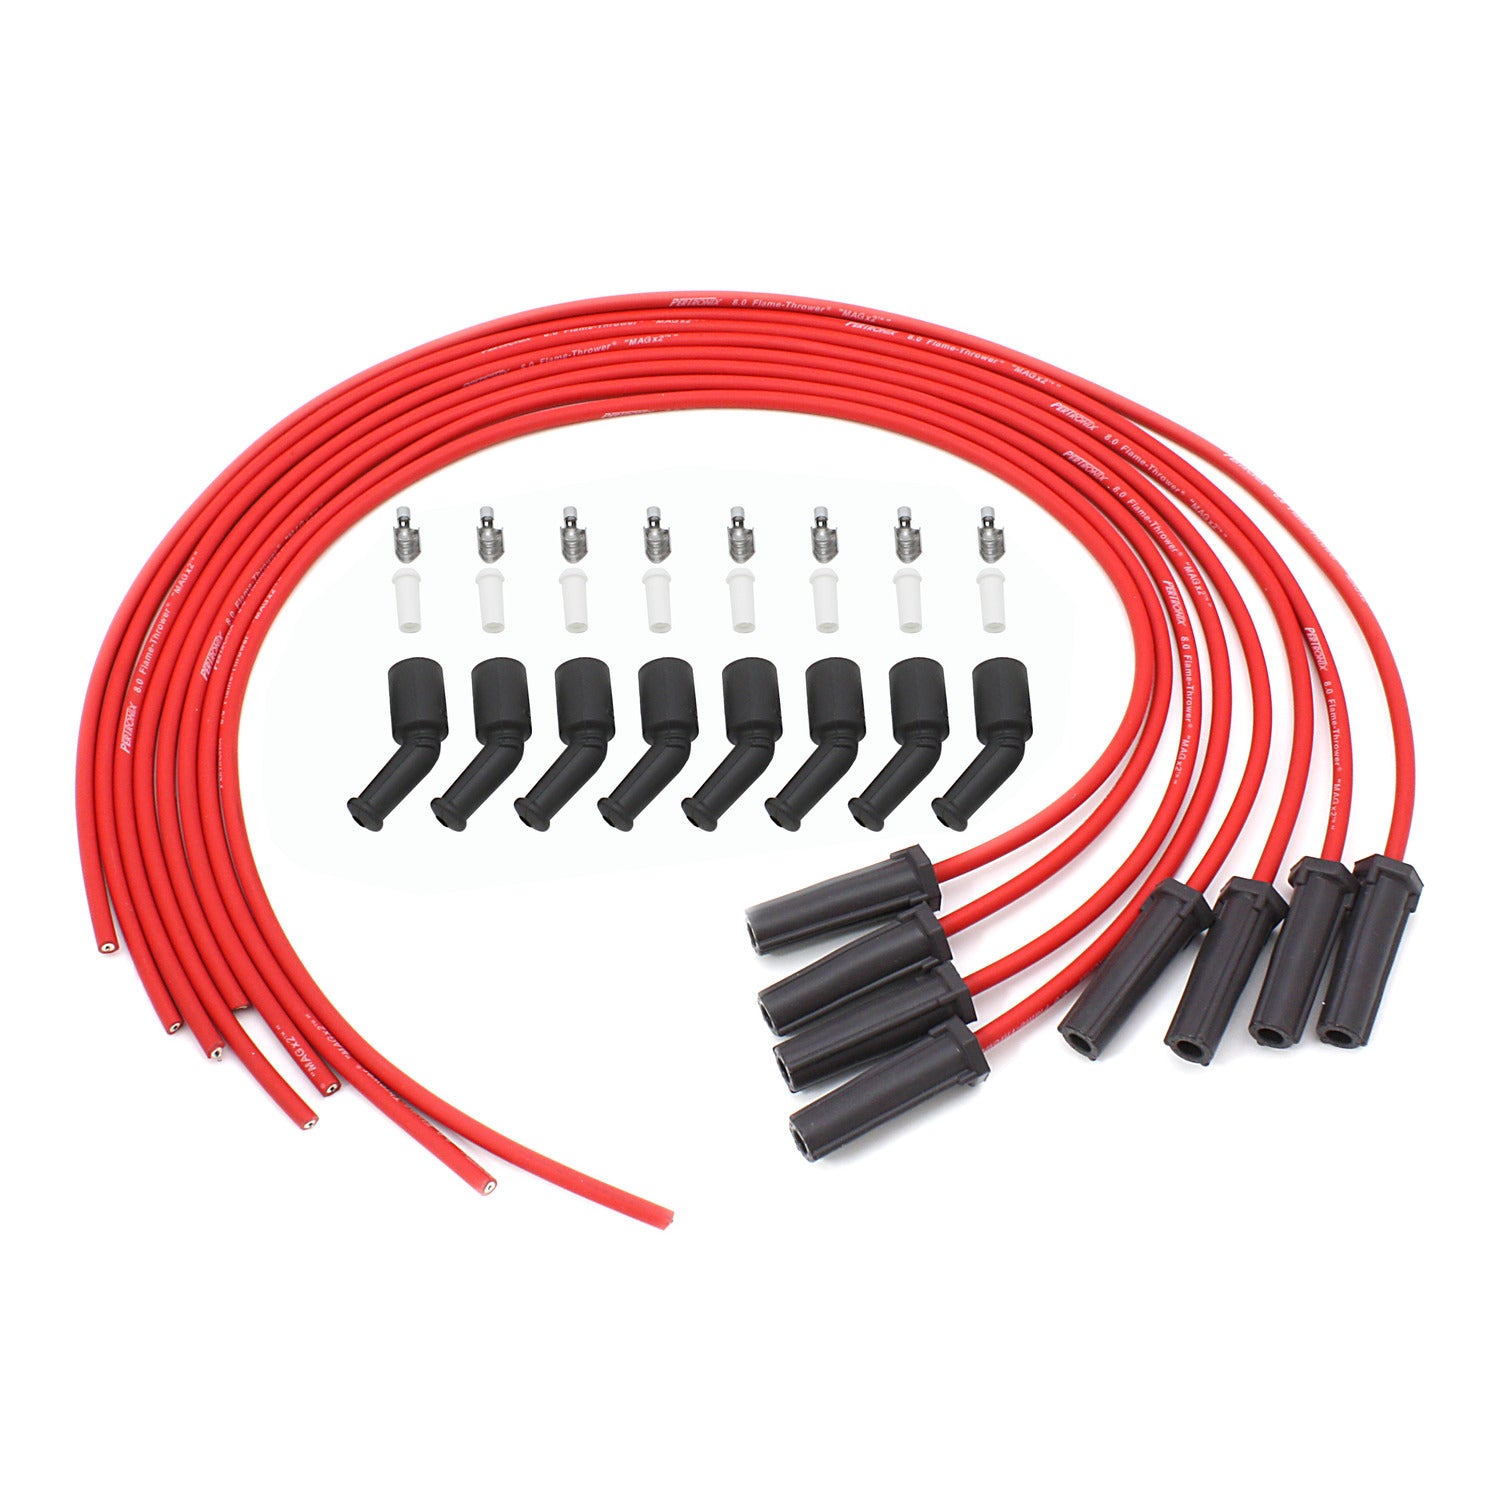 PerTronix 818480 Flame-Thrower Spark Plug Wires 8 cyl 8mm Universal LS 180 Degree Red